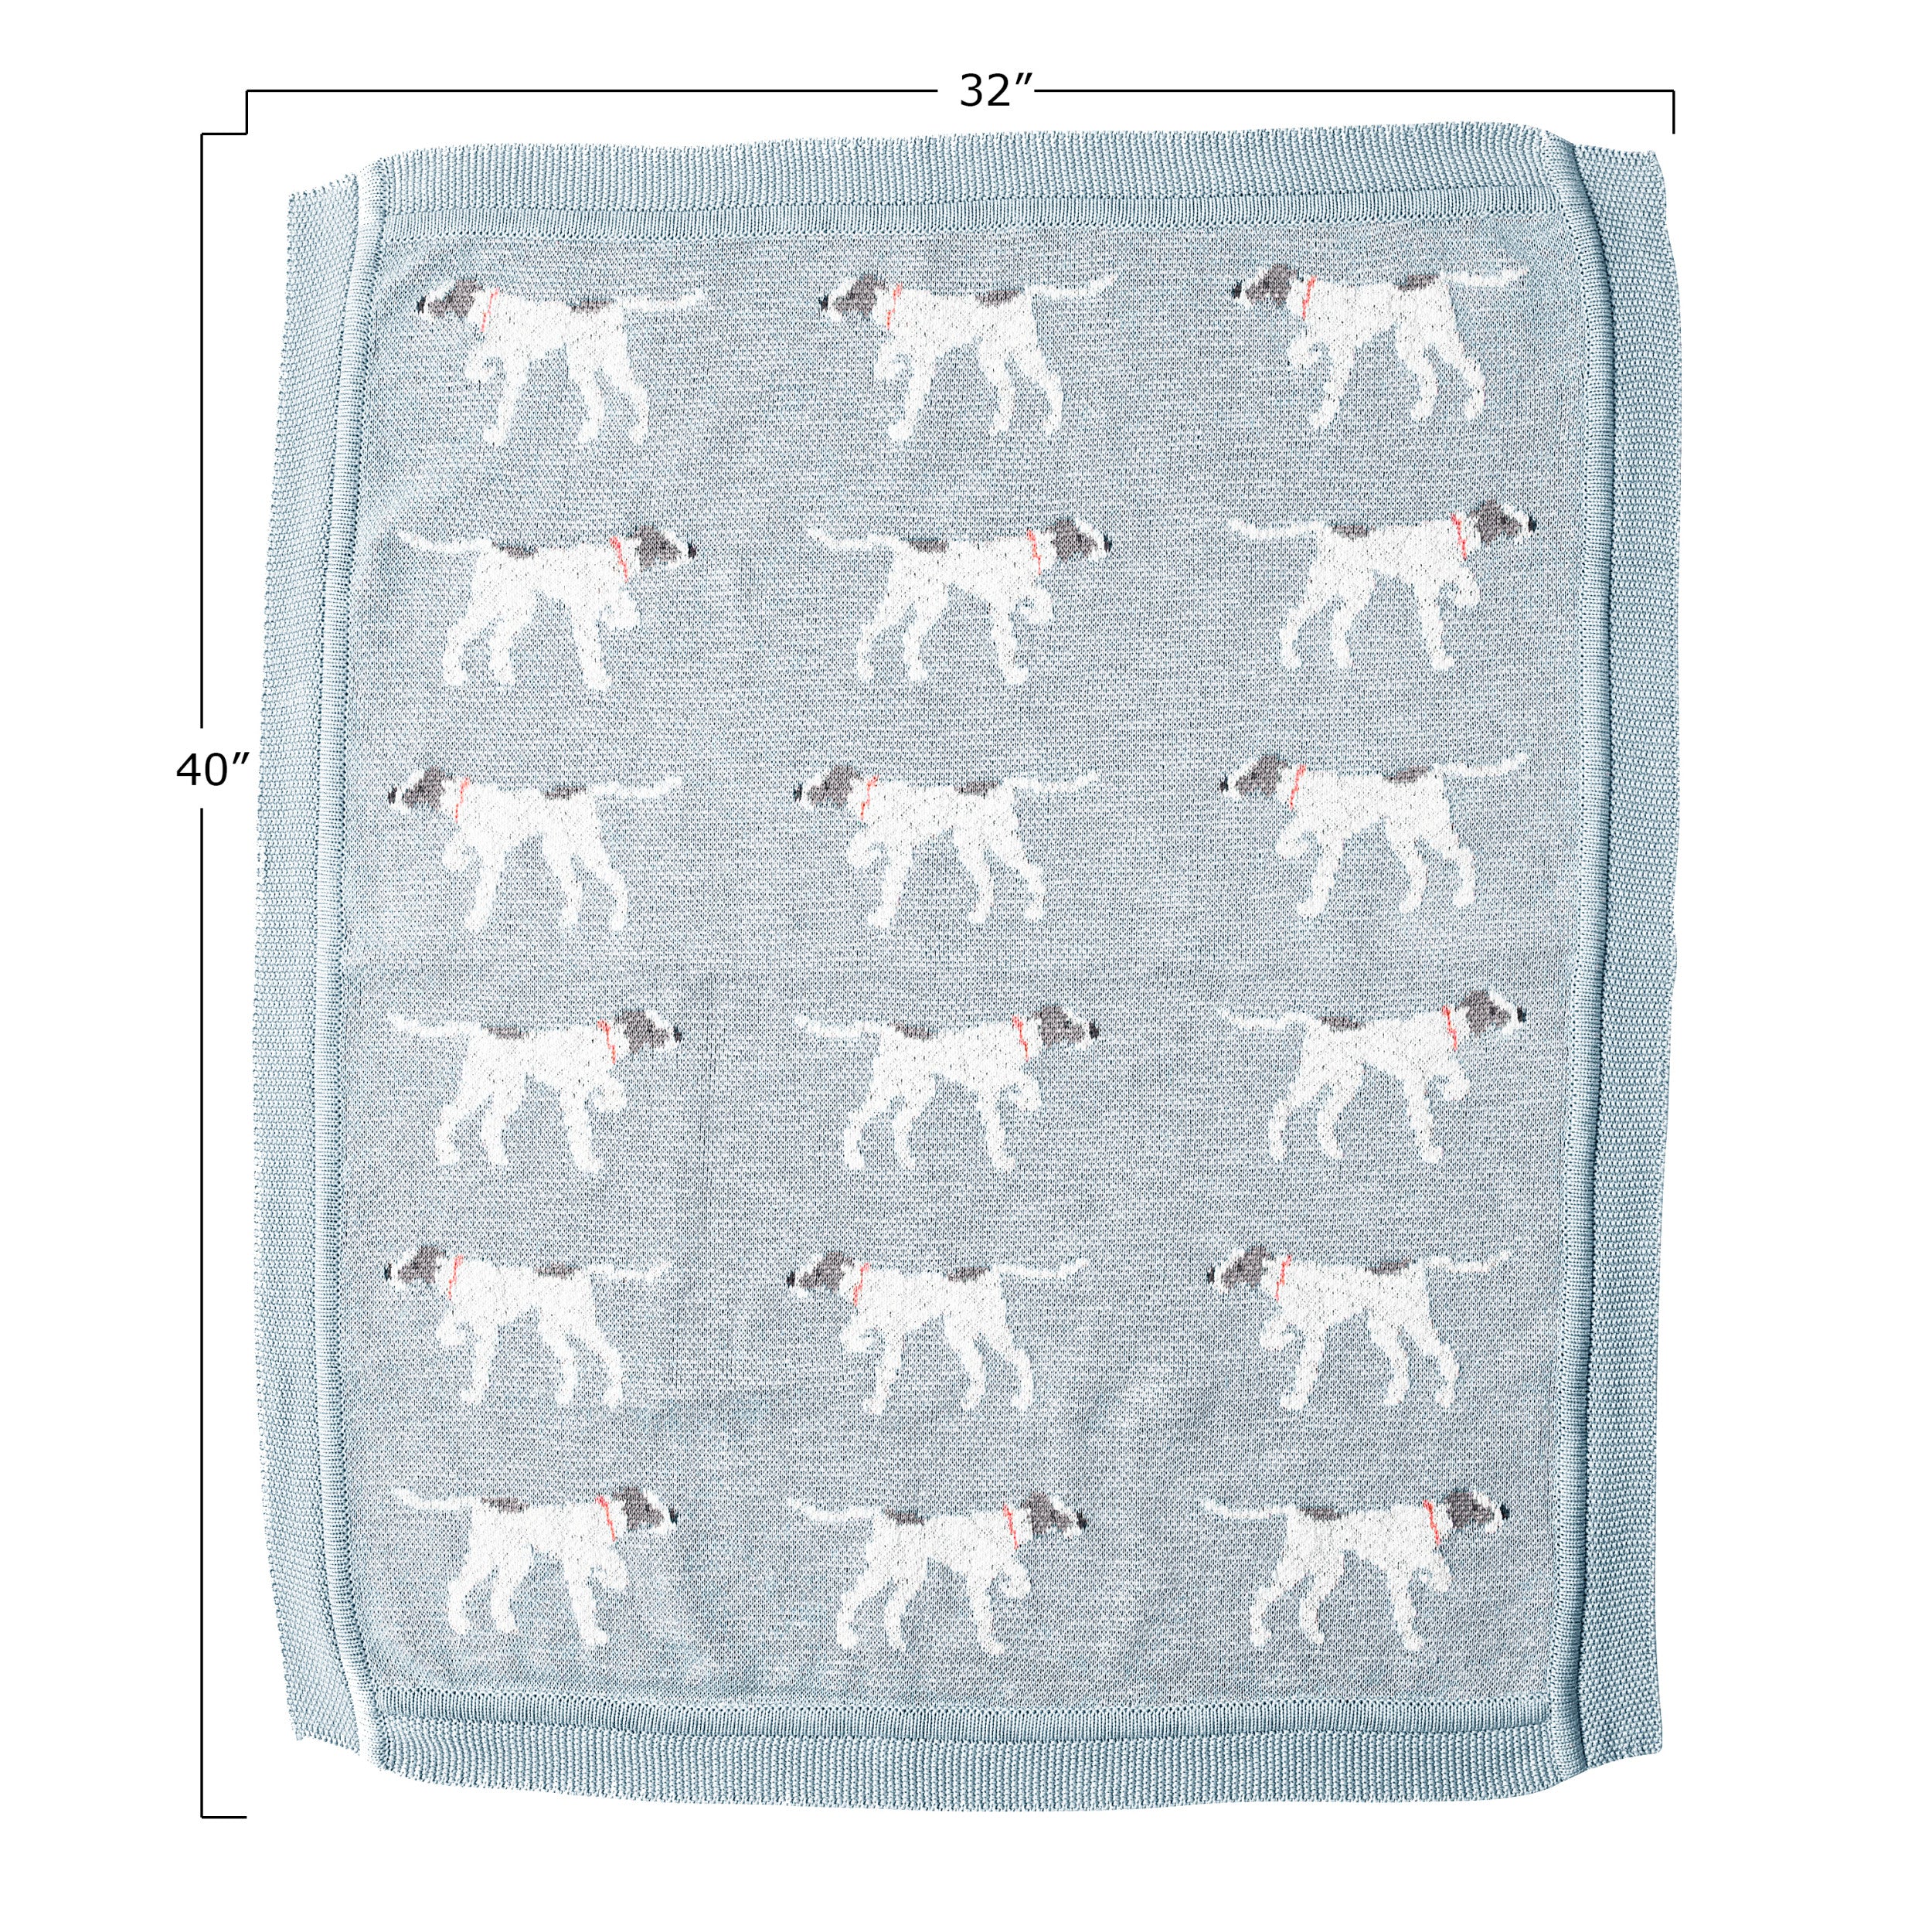 Cotton Knit Baby Blanket w/ Dogs